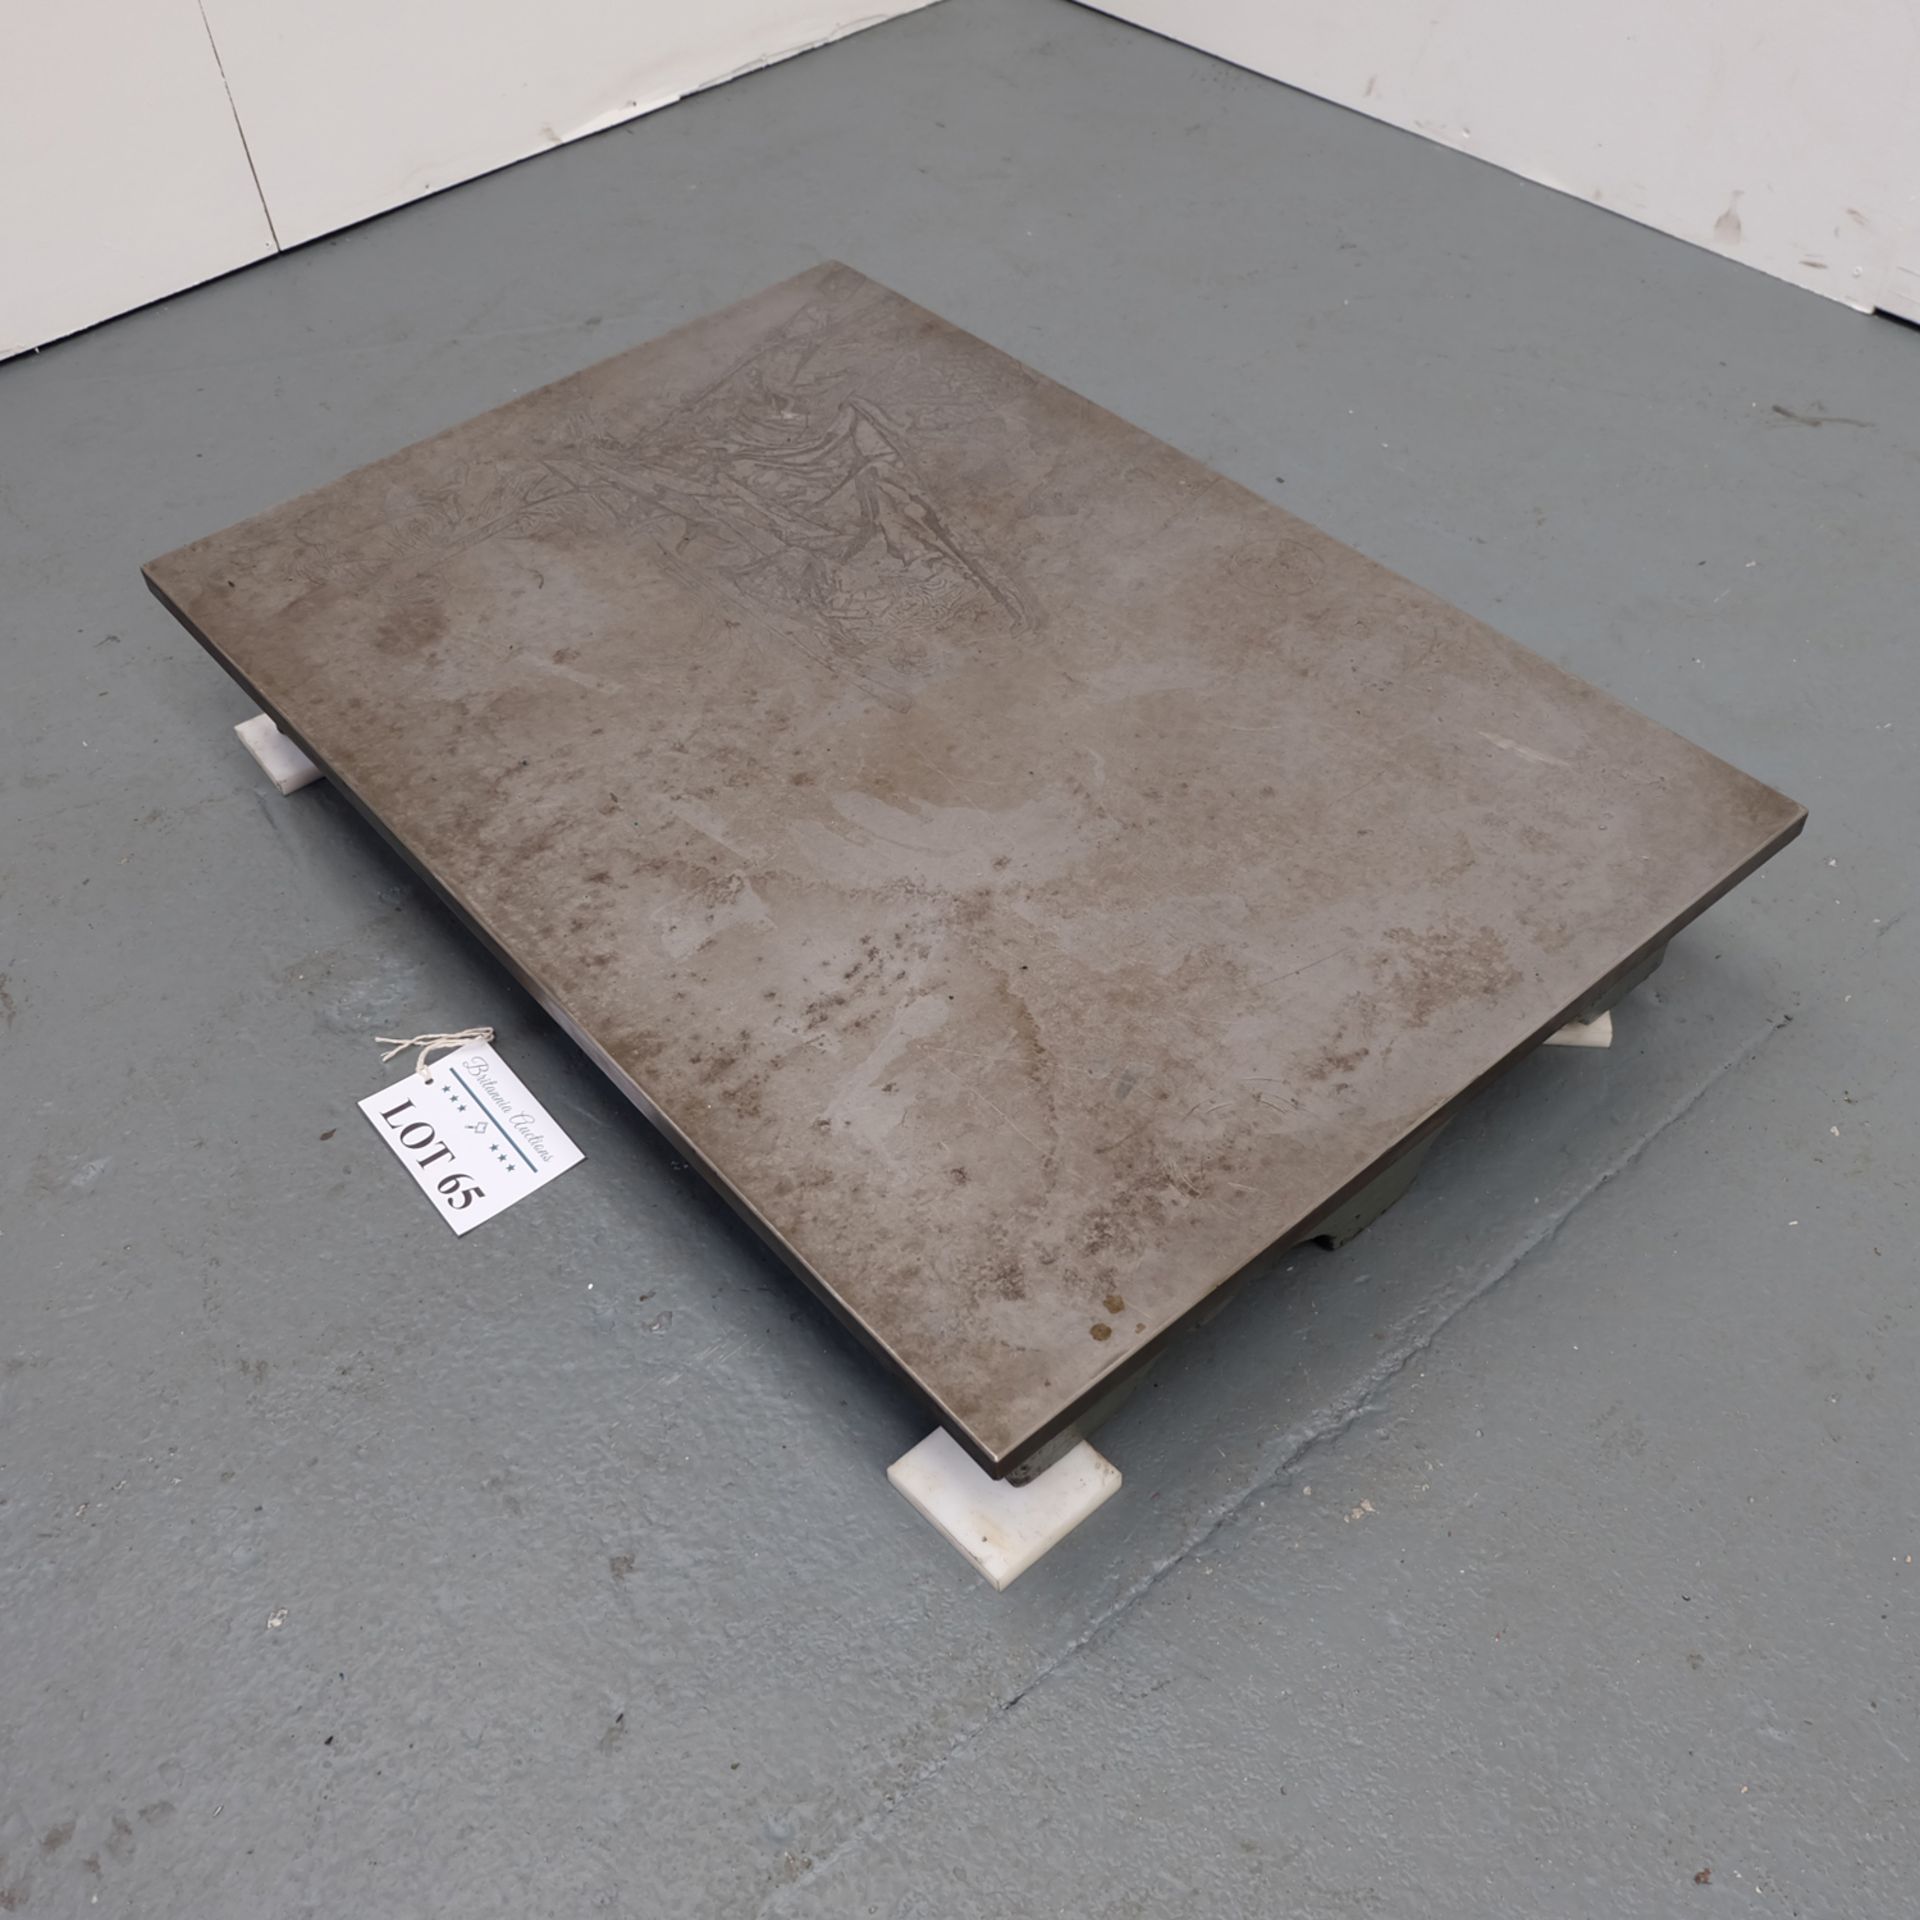 Large Cast Iron Surface Plate. 36" x 24" Approx. - Image 2 of 7